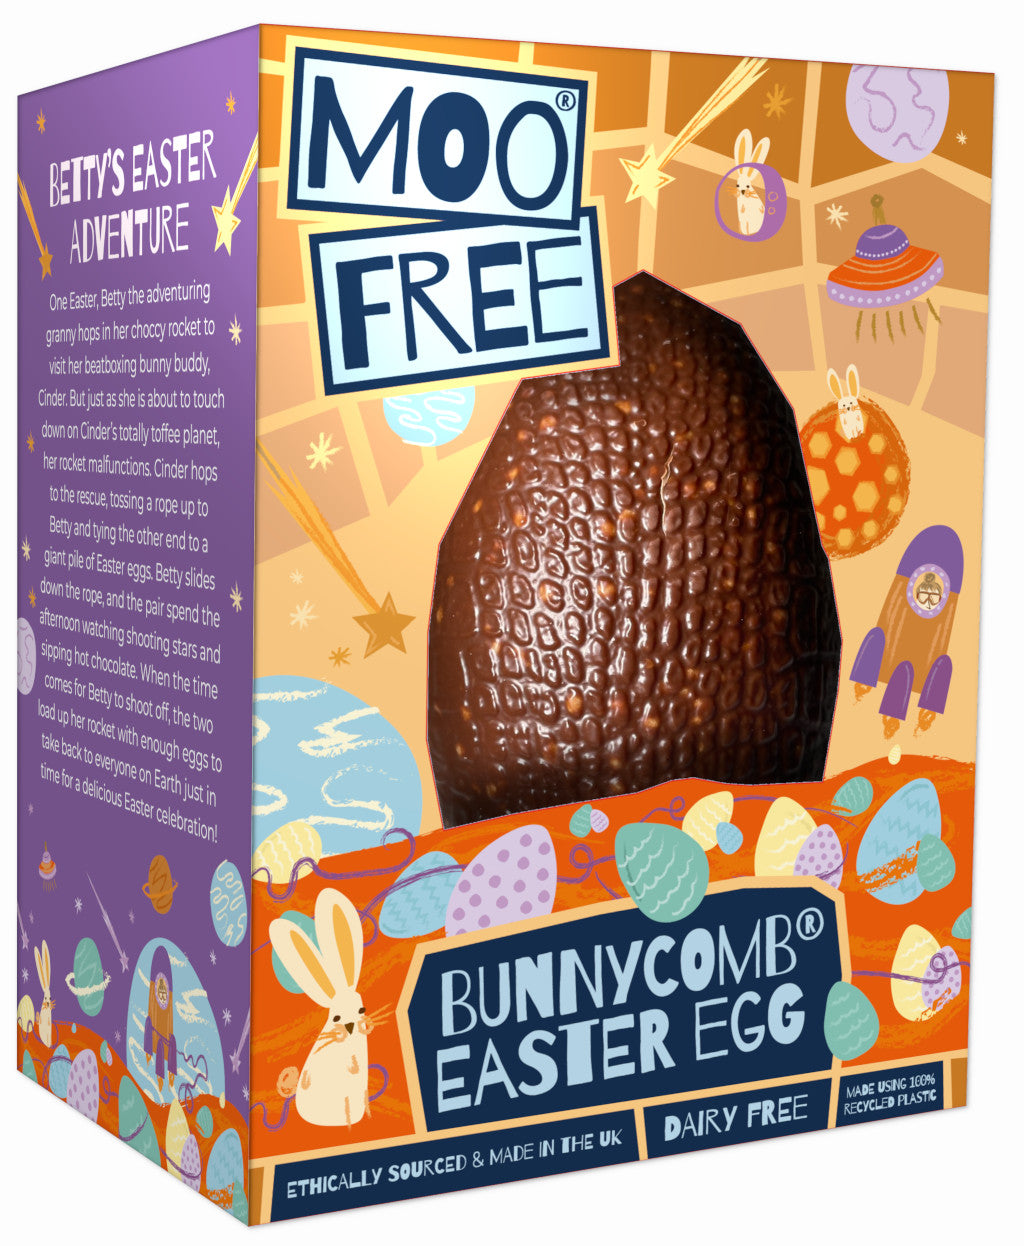 moo free dairy free bunnycomb easter egg